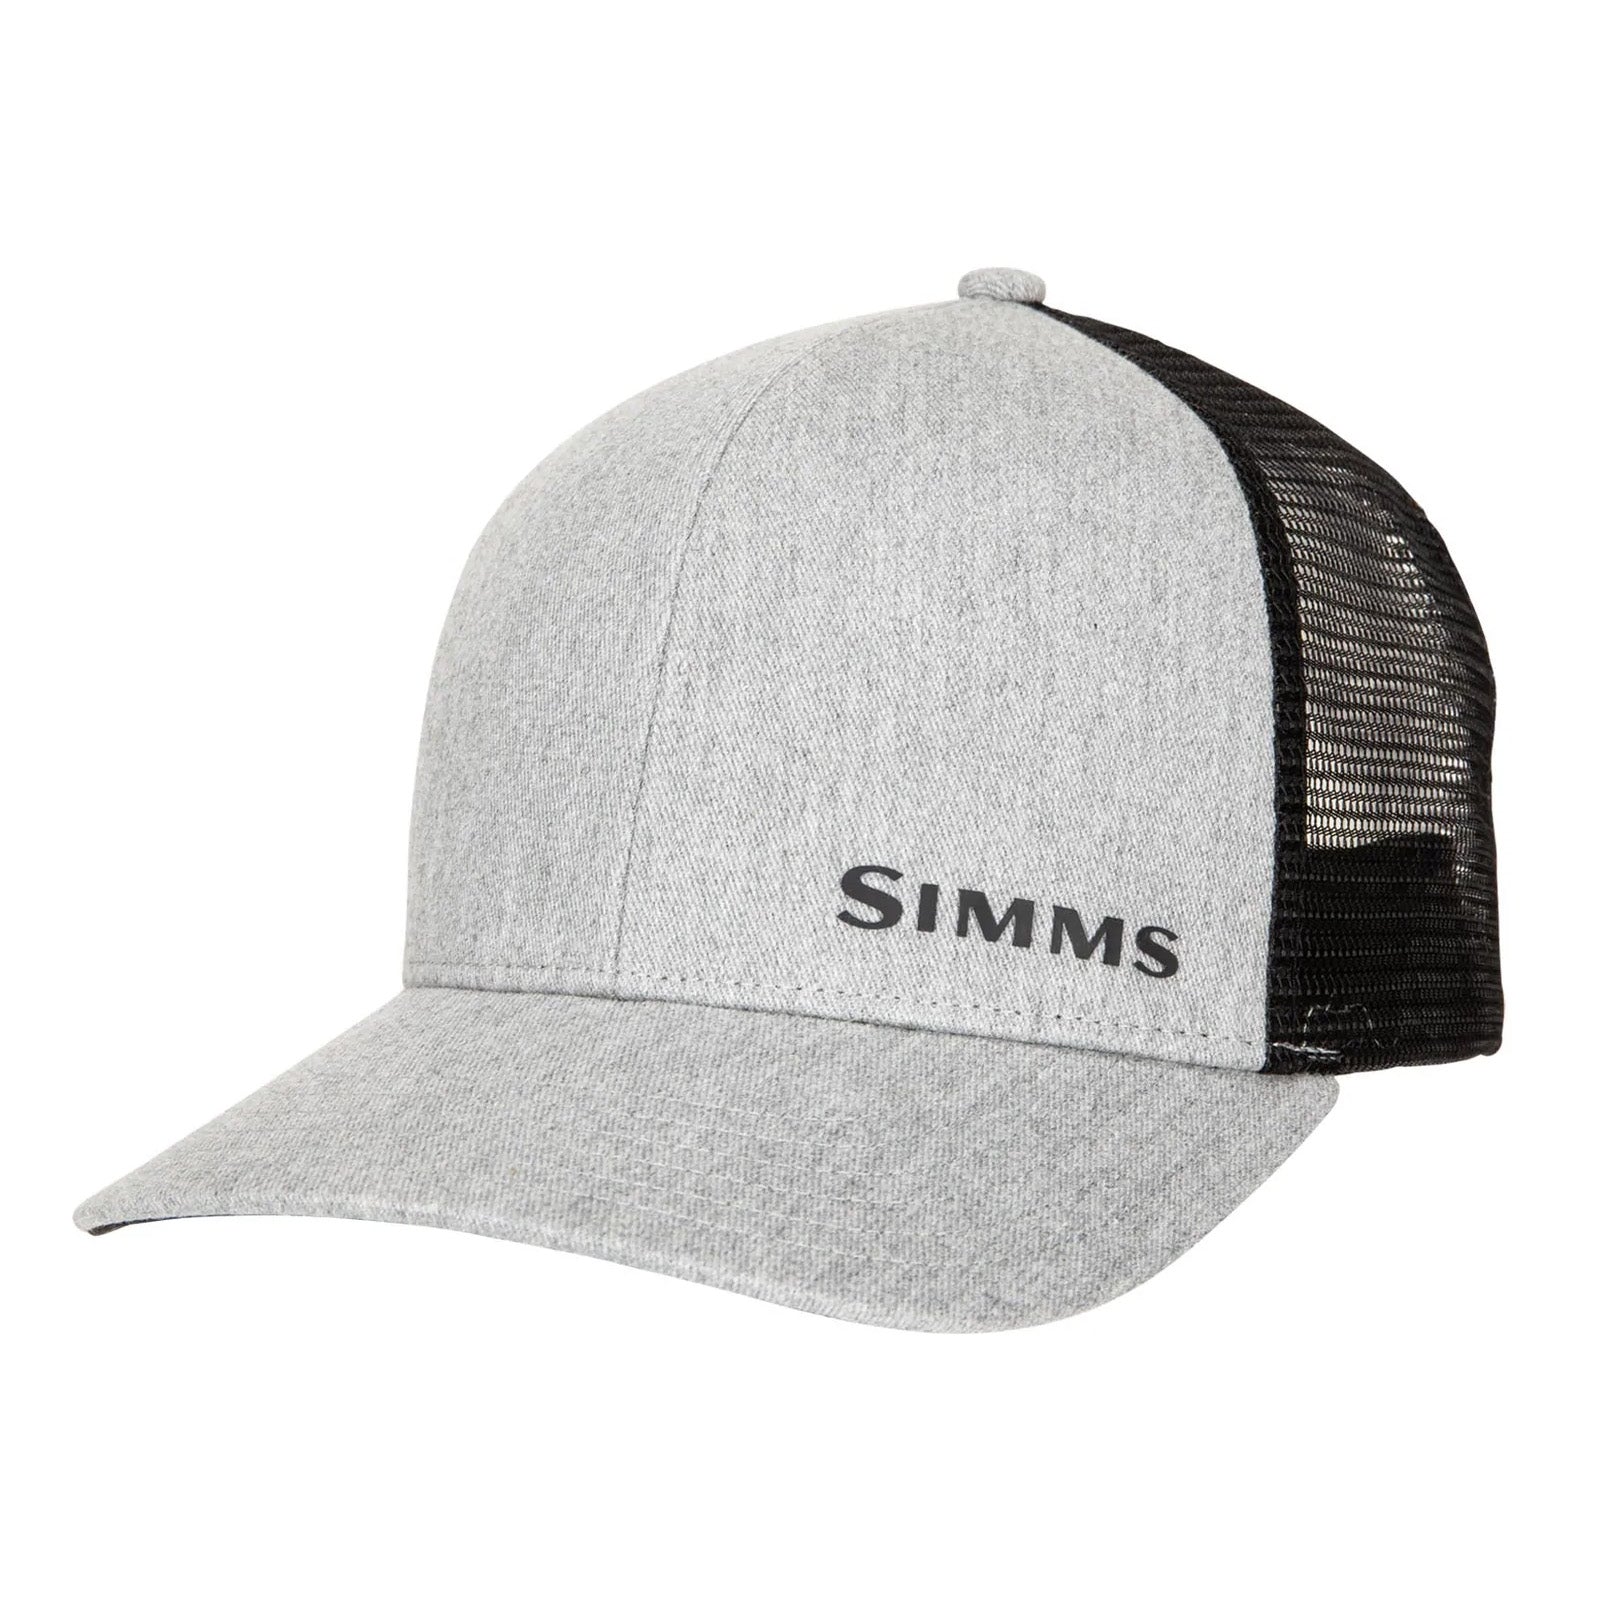 Hats and Headwear for Anglers | Omnia Fishing